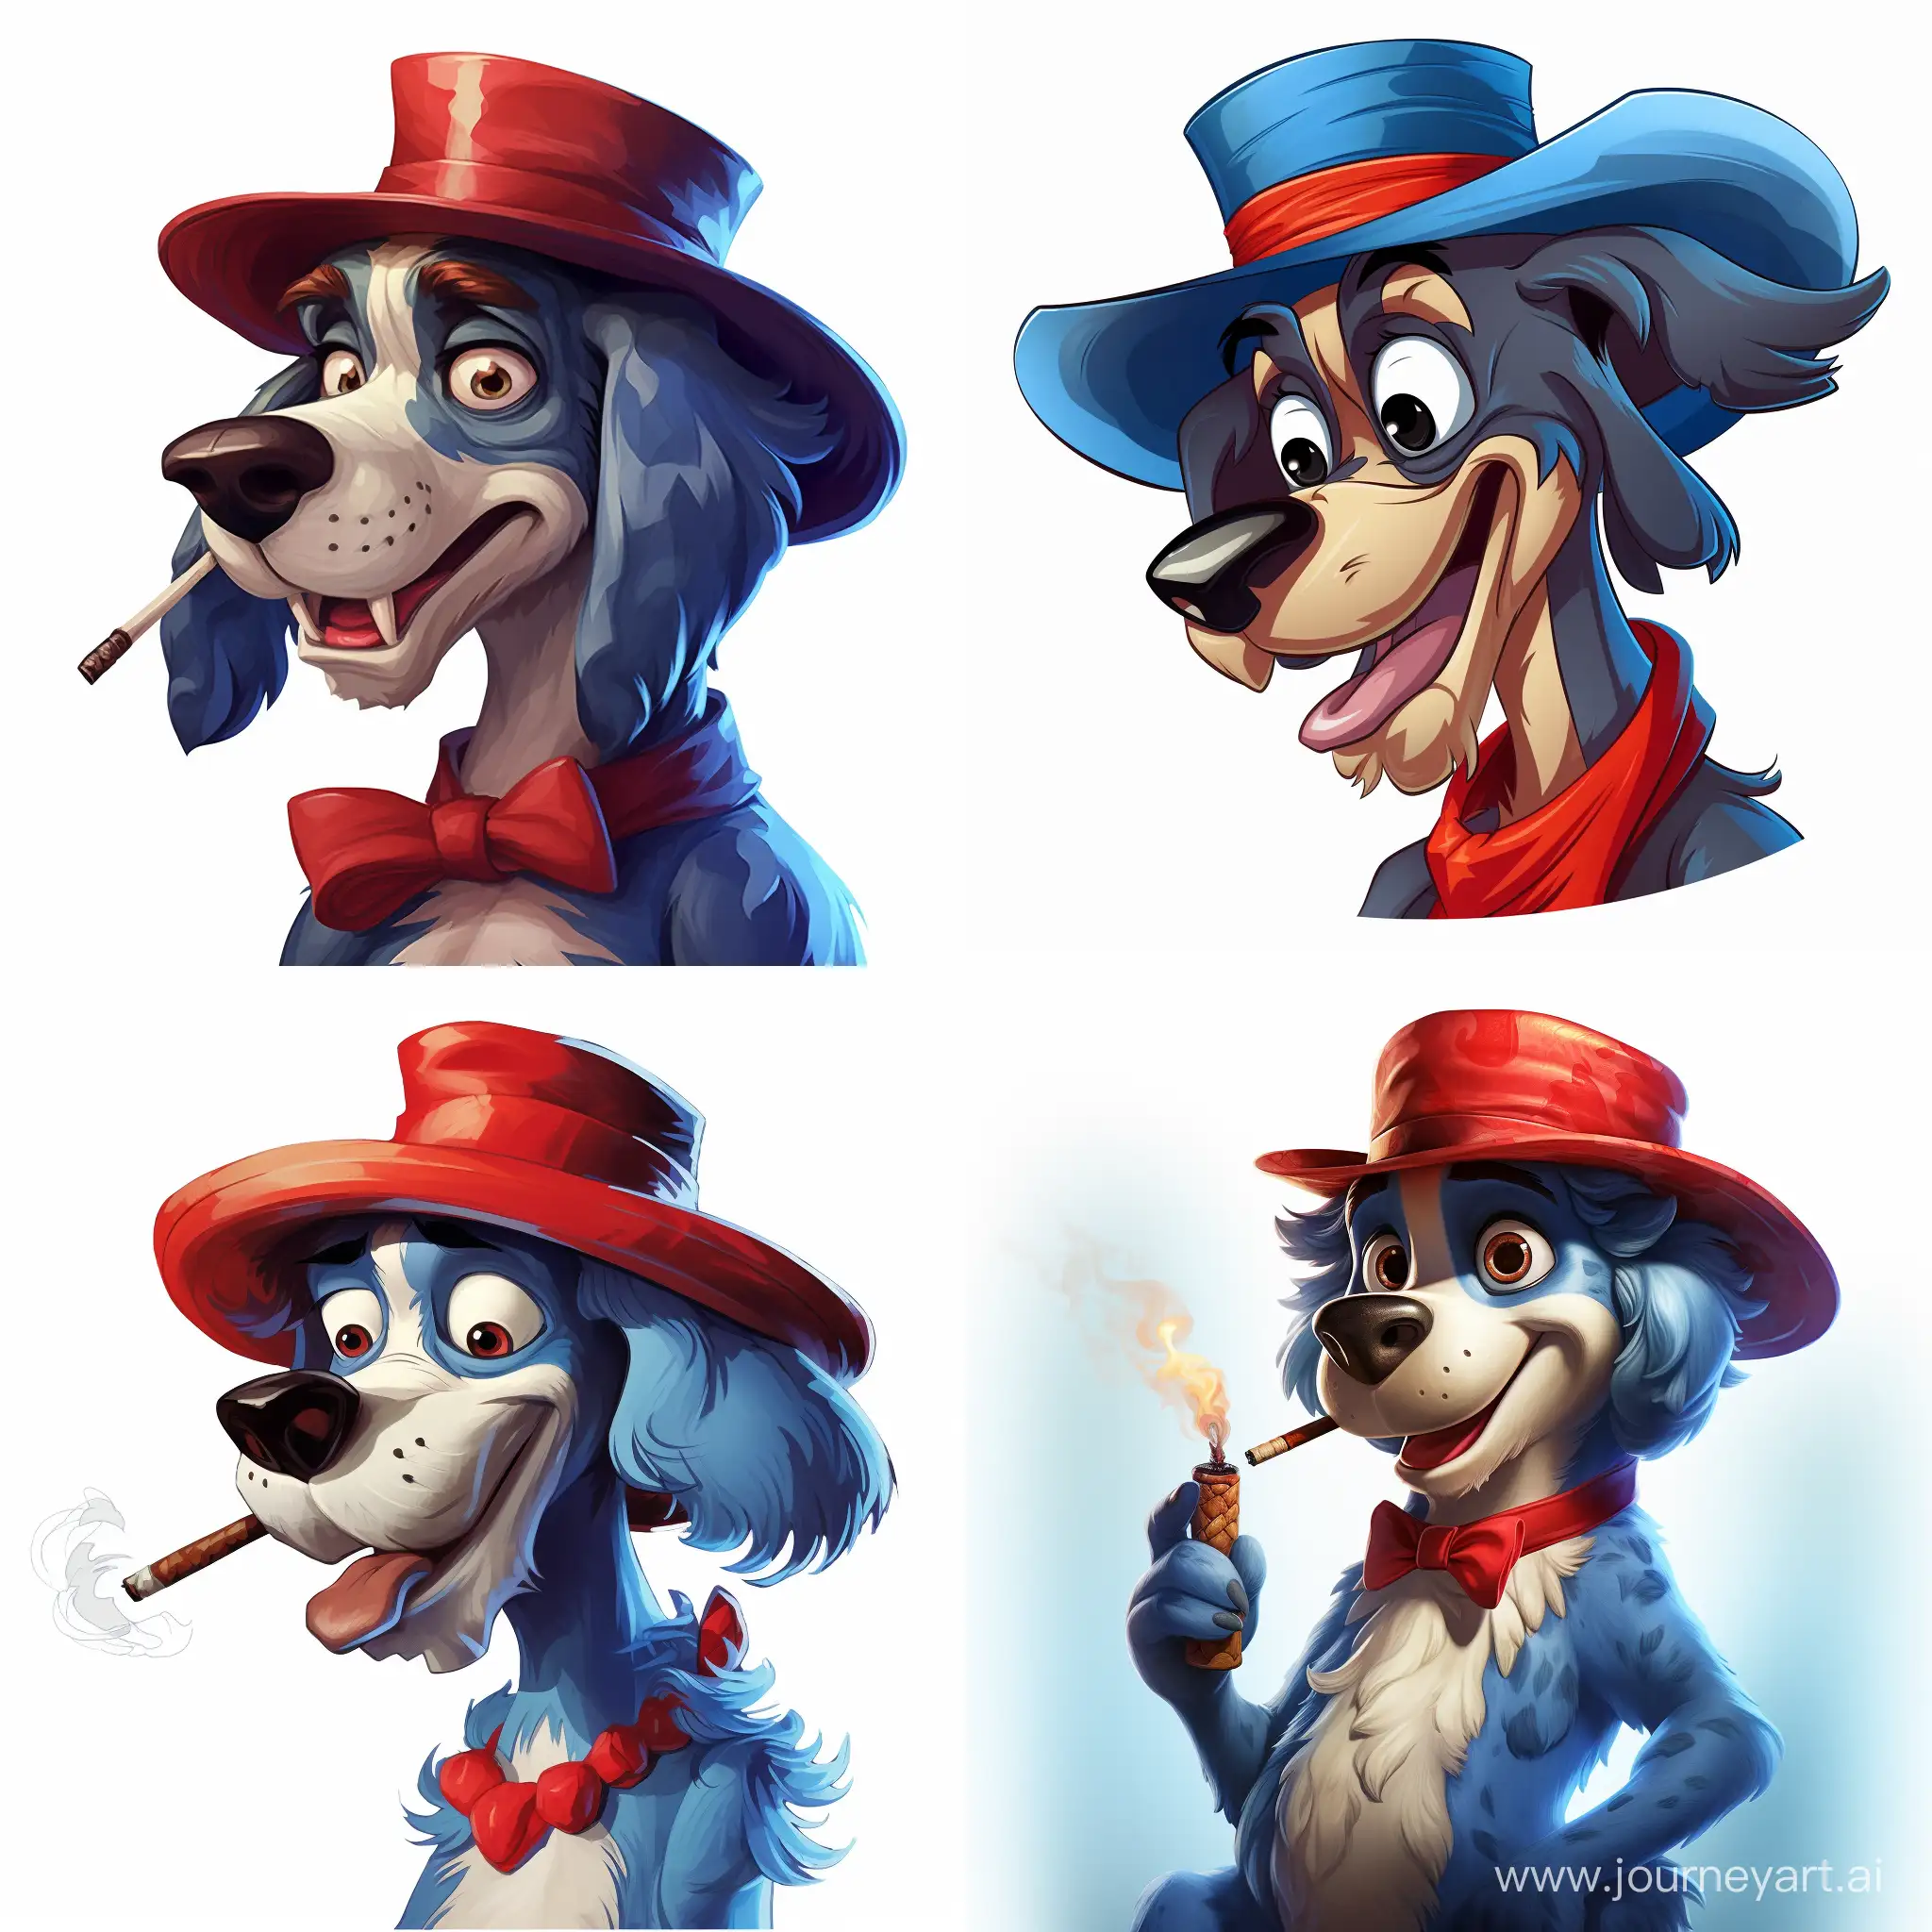 Blue dog smoking a cigar in a red hat, animation style, white background